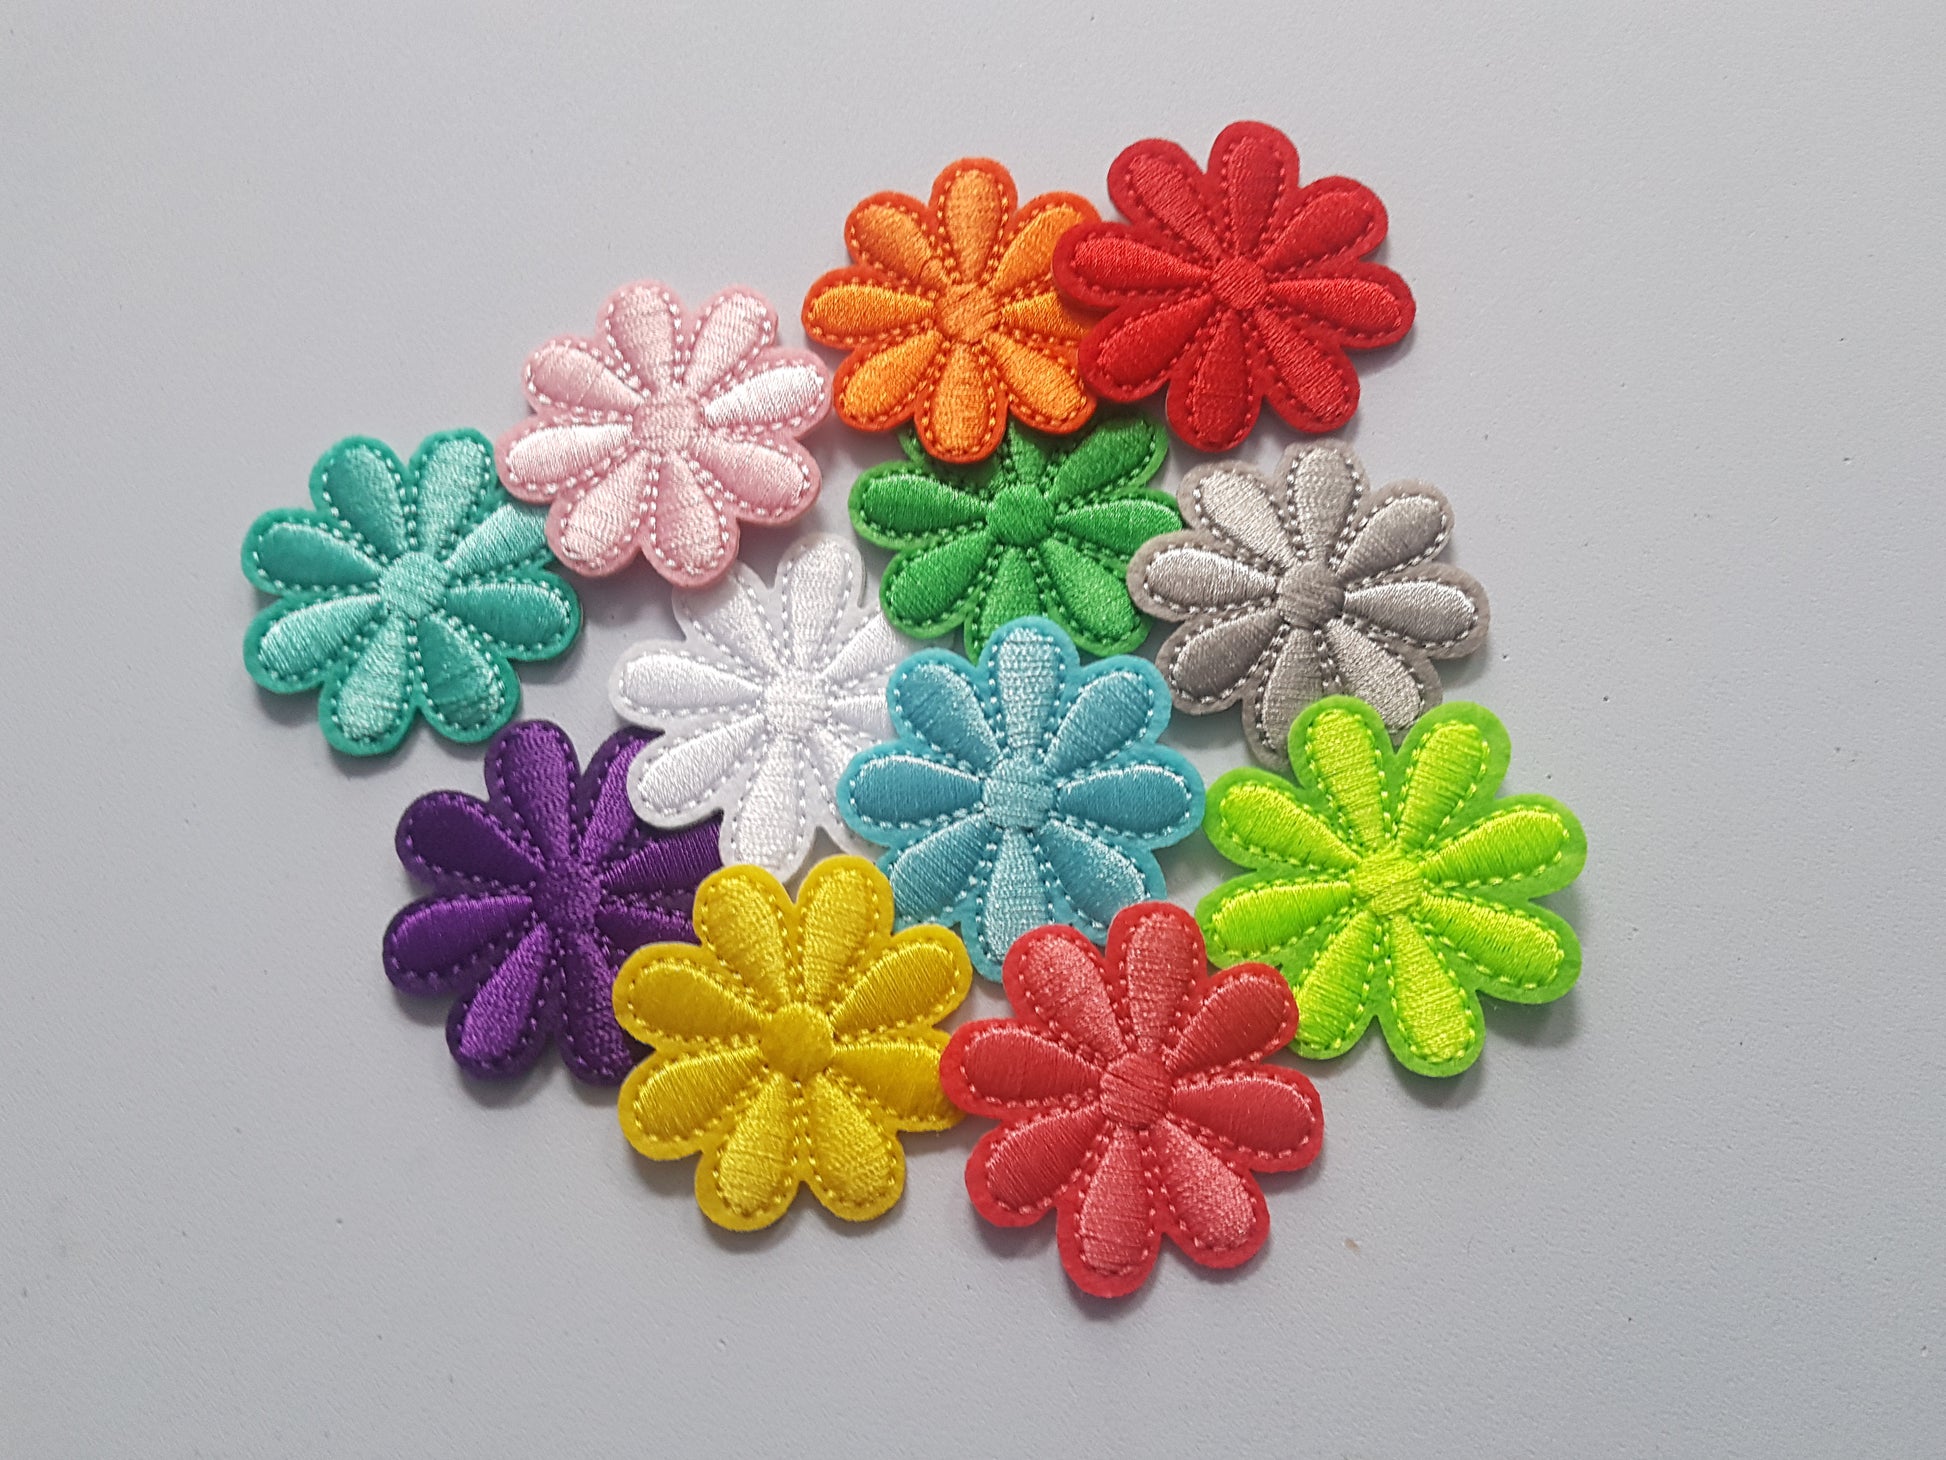 43mm iron-on flower appliques